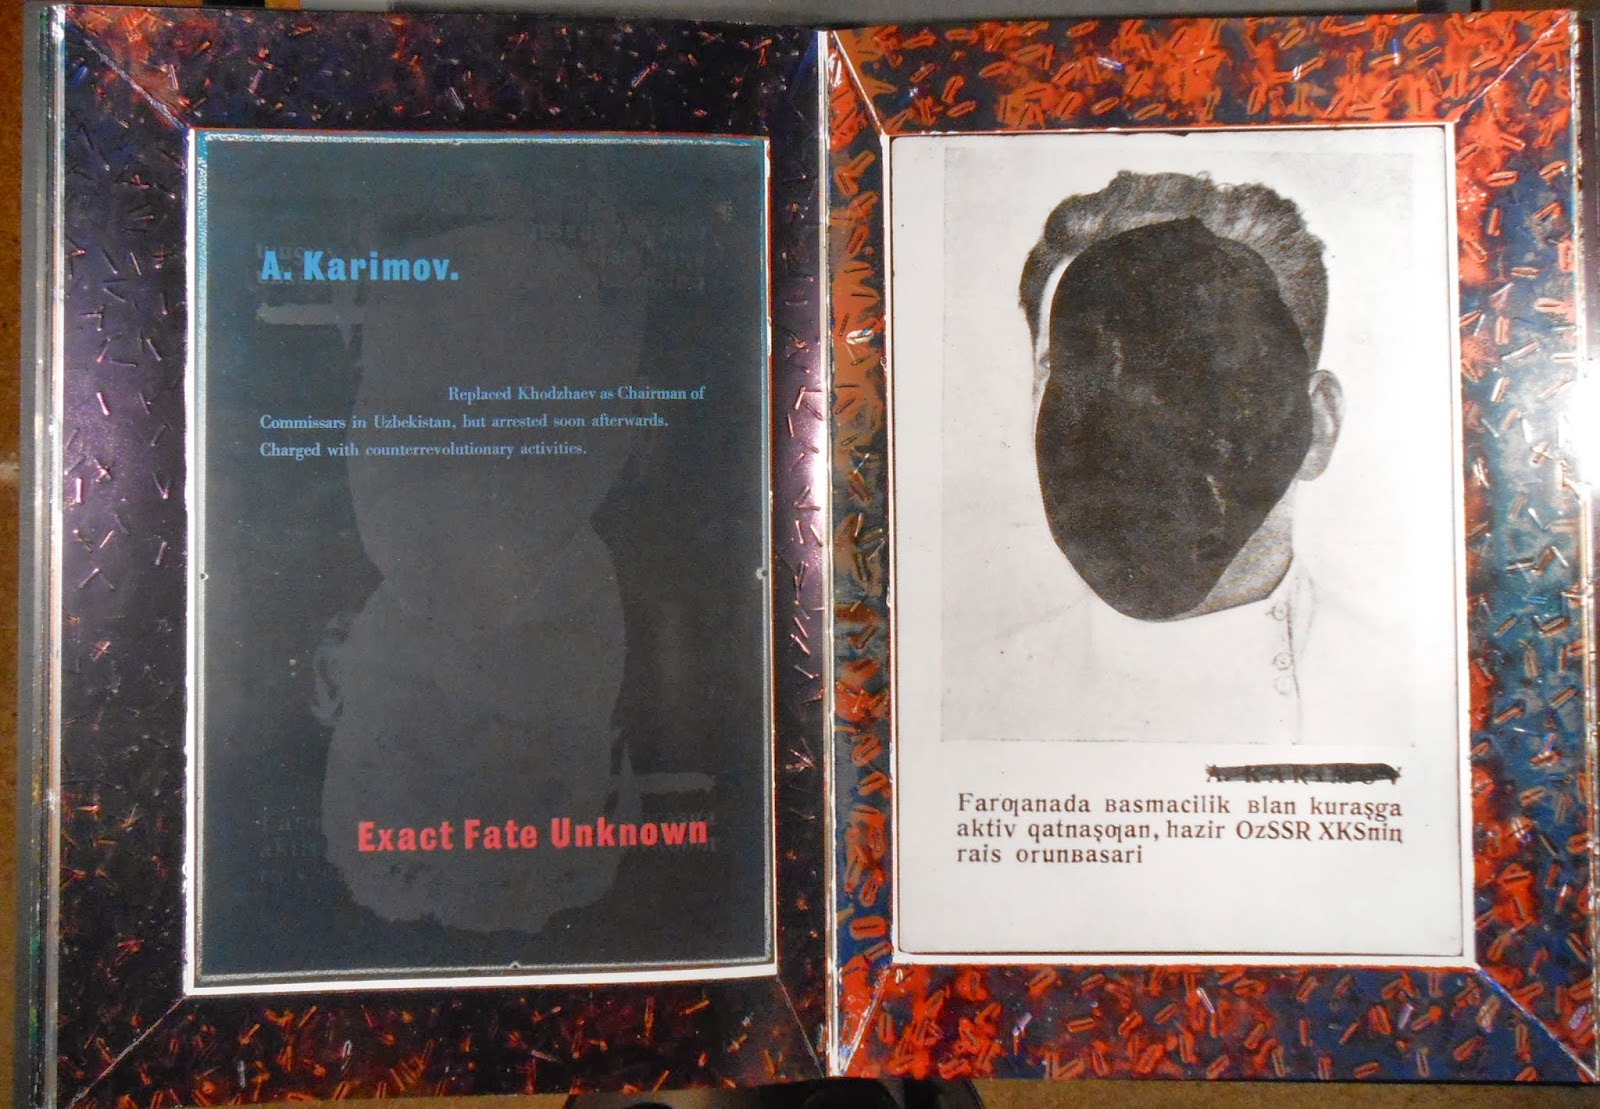 Two pages including the face and name of a man, both of which have been blacked out.